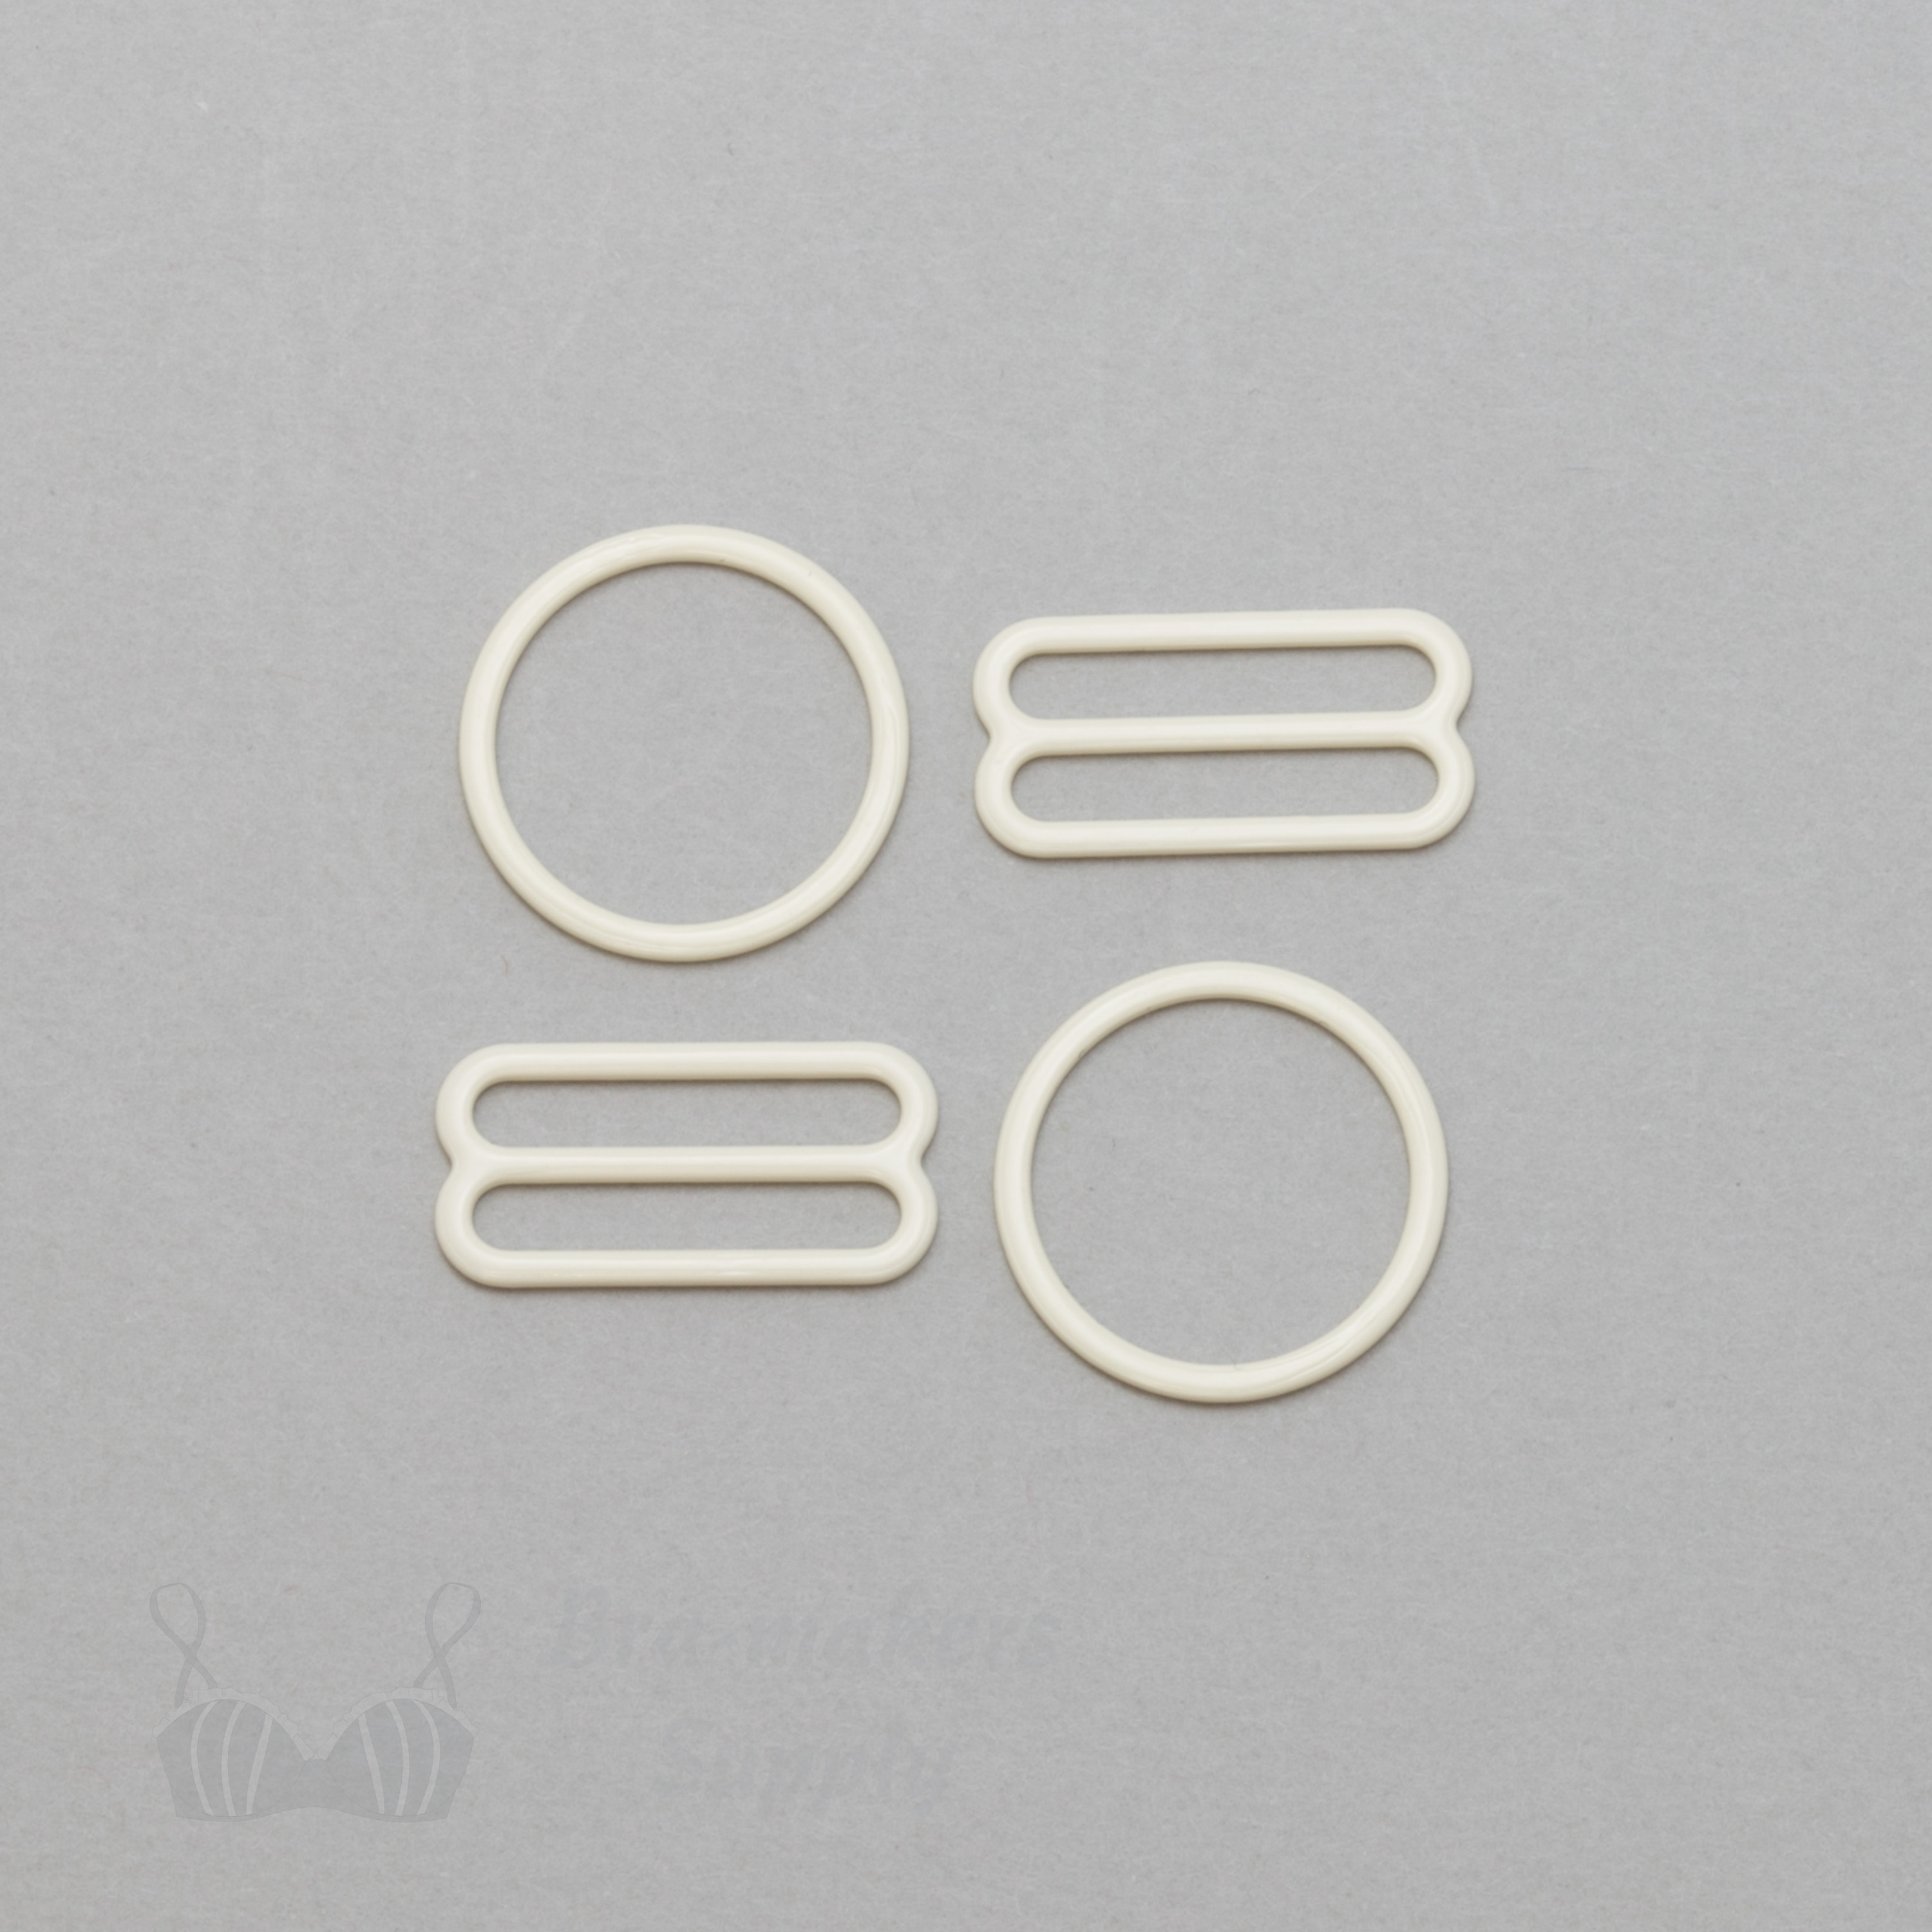 three quarters inch 19mm RM-6 ivory nylon coated metal rings sliders or winter white Pantone 11-0507 from Bra-Makers Supply 2 sliders 2 rings shown